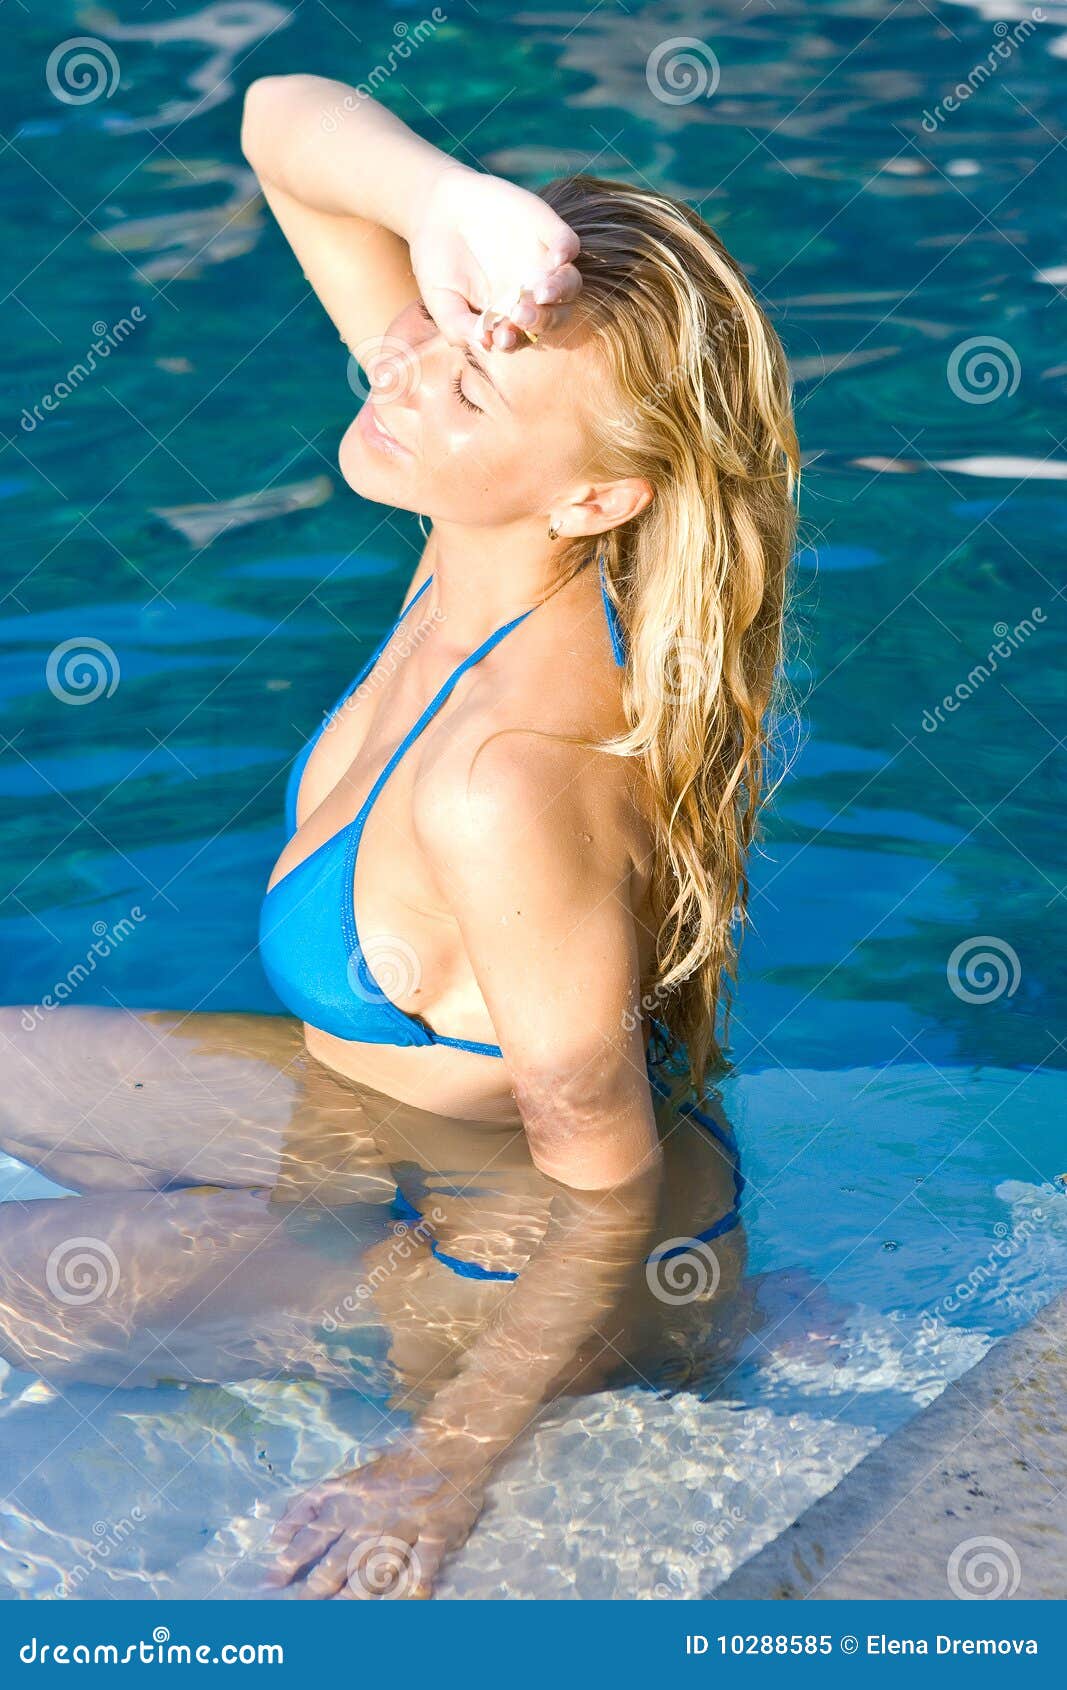 Blonde Girl Relaxing In Water In The Pool Stock Image I